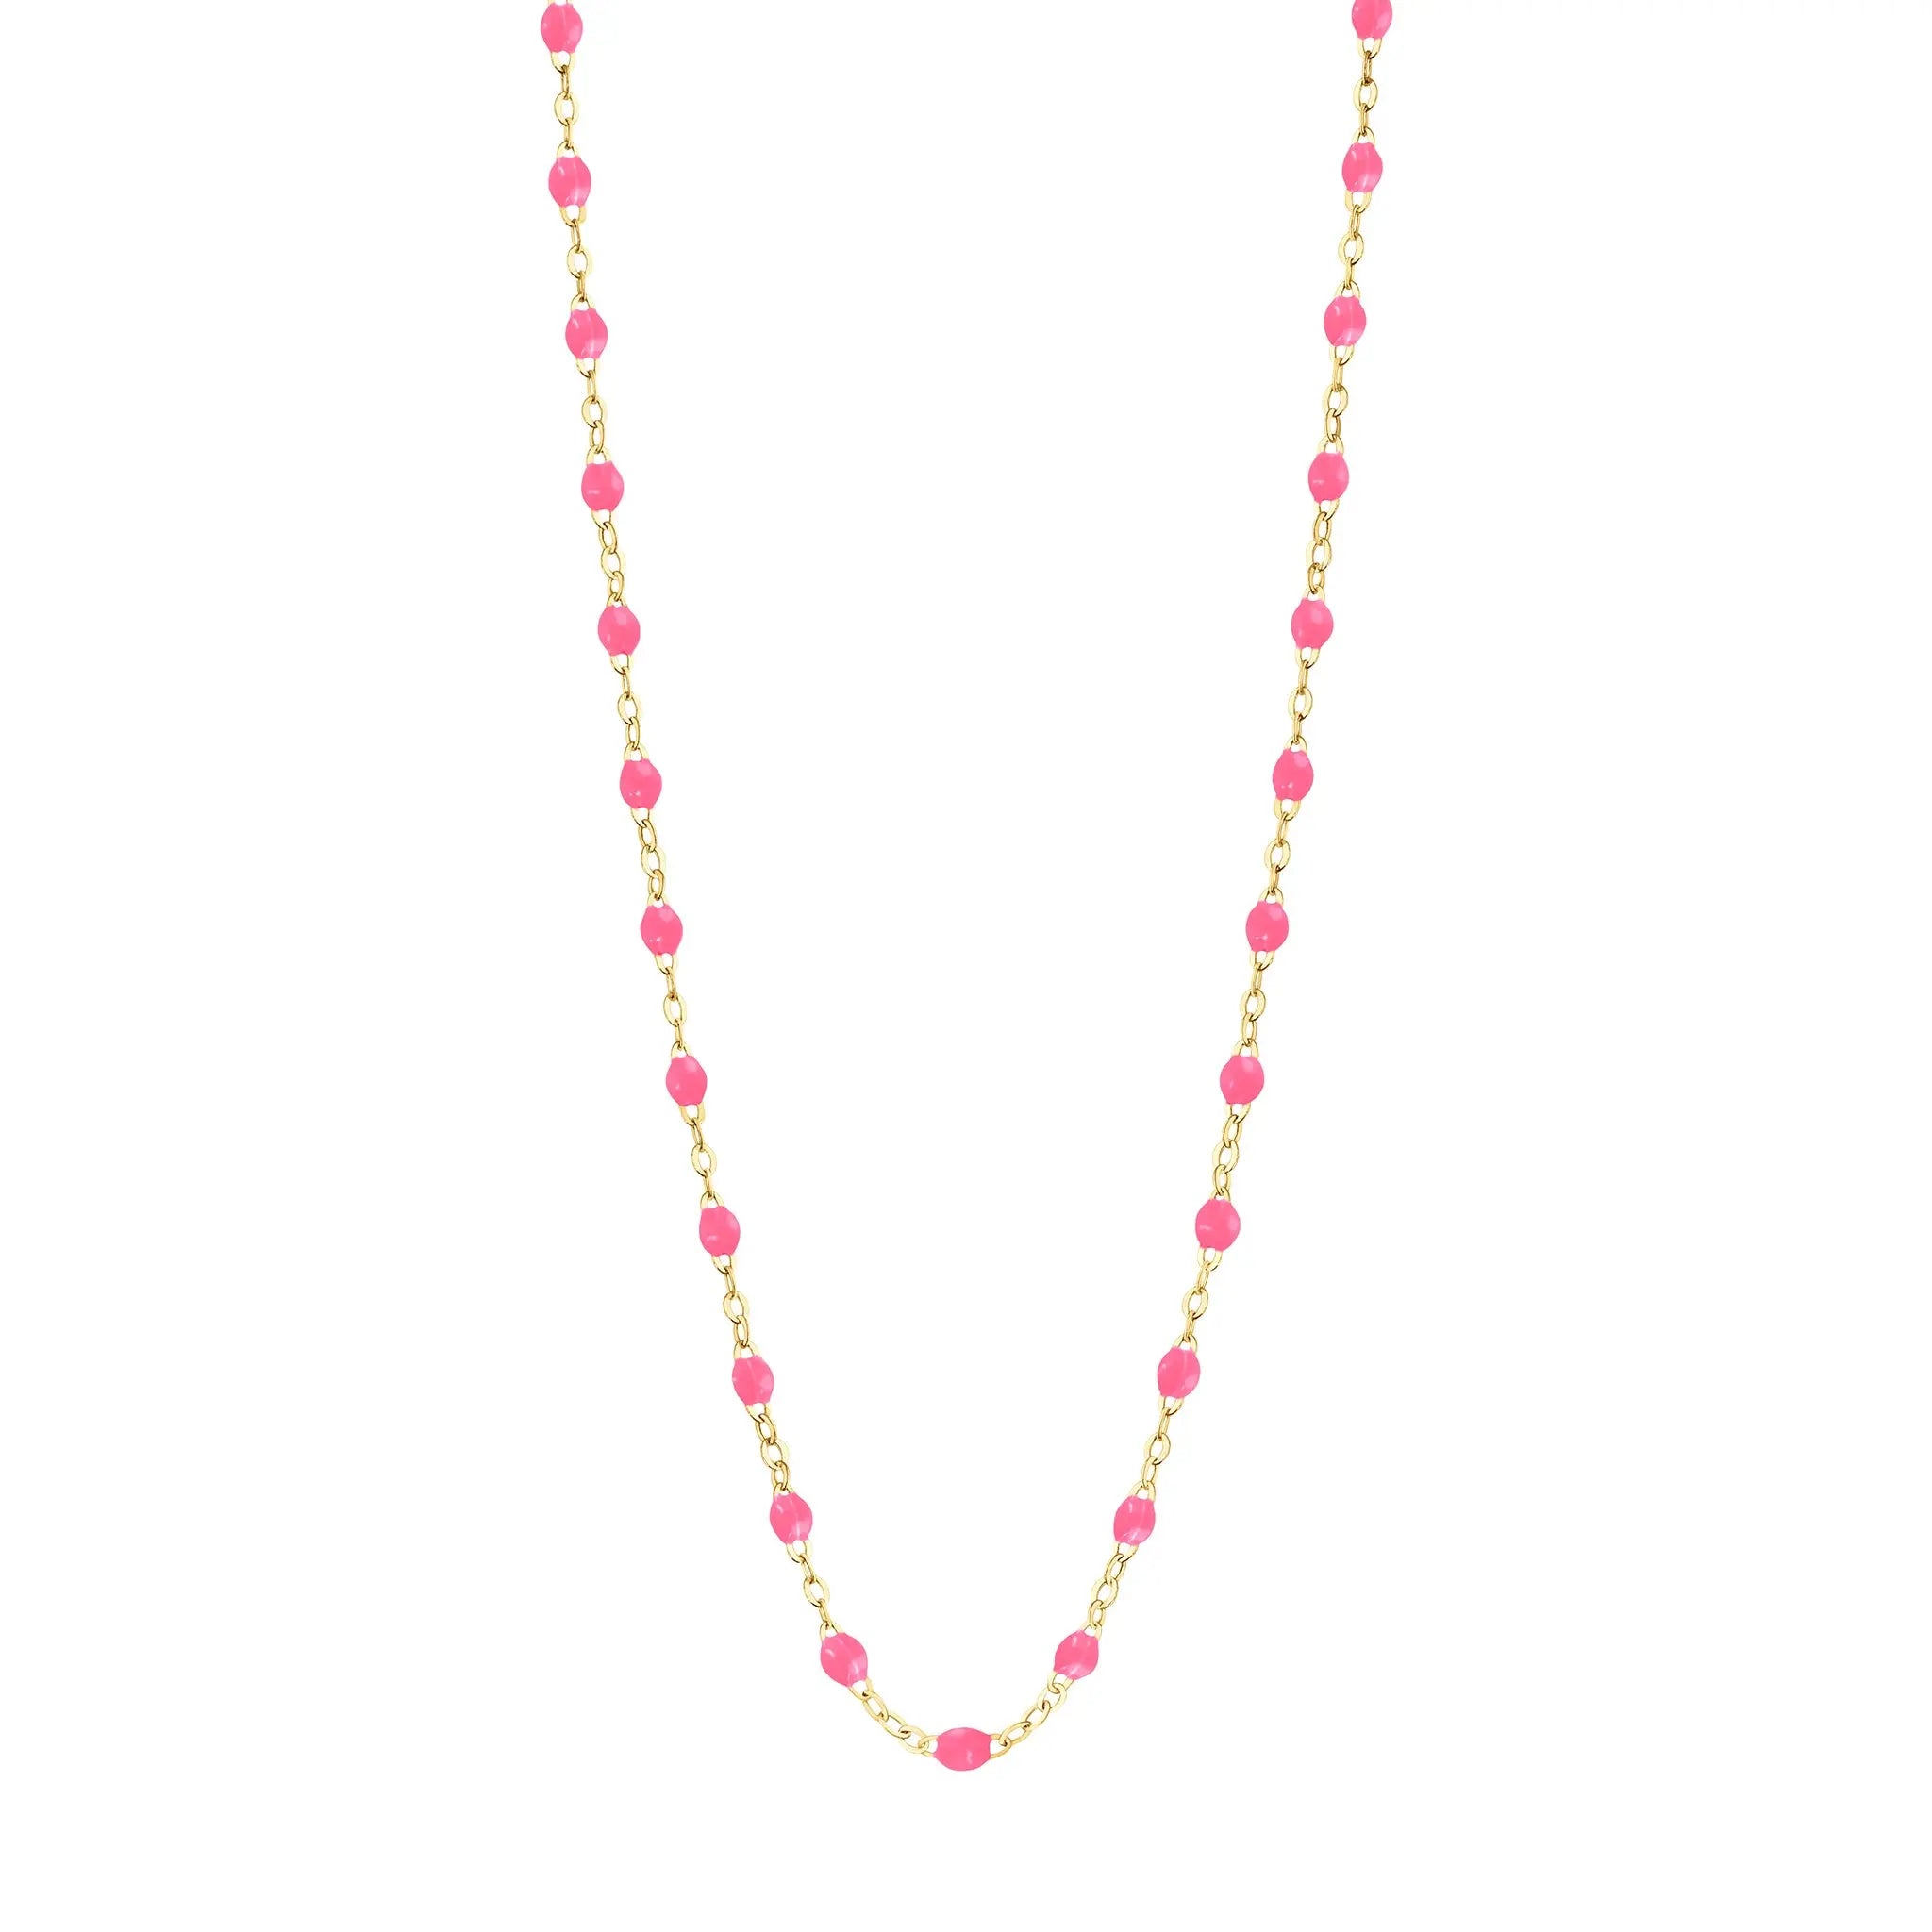 Stack you necklace layers with this versatile beaded chain! The Classic Gigi Necklace by gigi CLOZEAU features 18 carat yellow gold, and striking Pink resin jewels for an everyday effortless appearance. Handcrafted in 18k yellow gold. The beads measure 1.50mm in diameter and is finished with a spring ring clasp. The length is 16.5 inches.